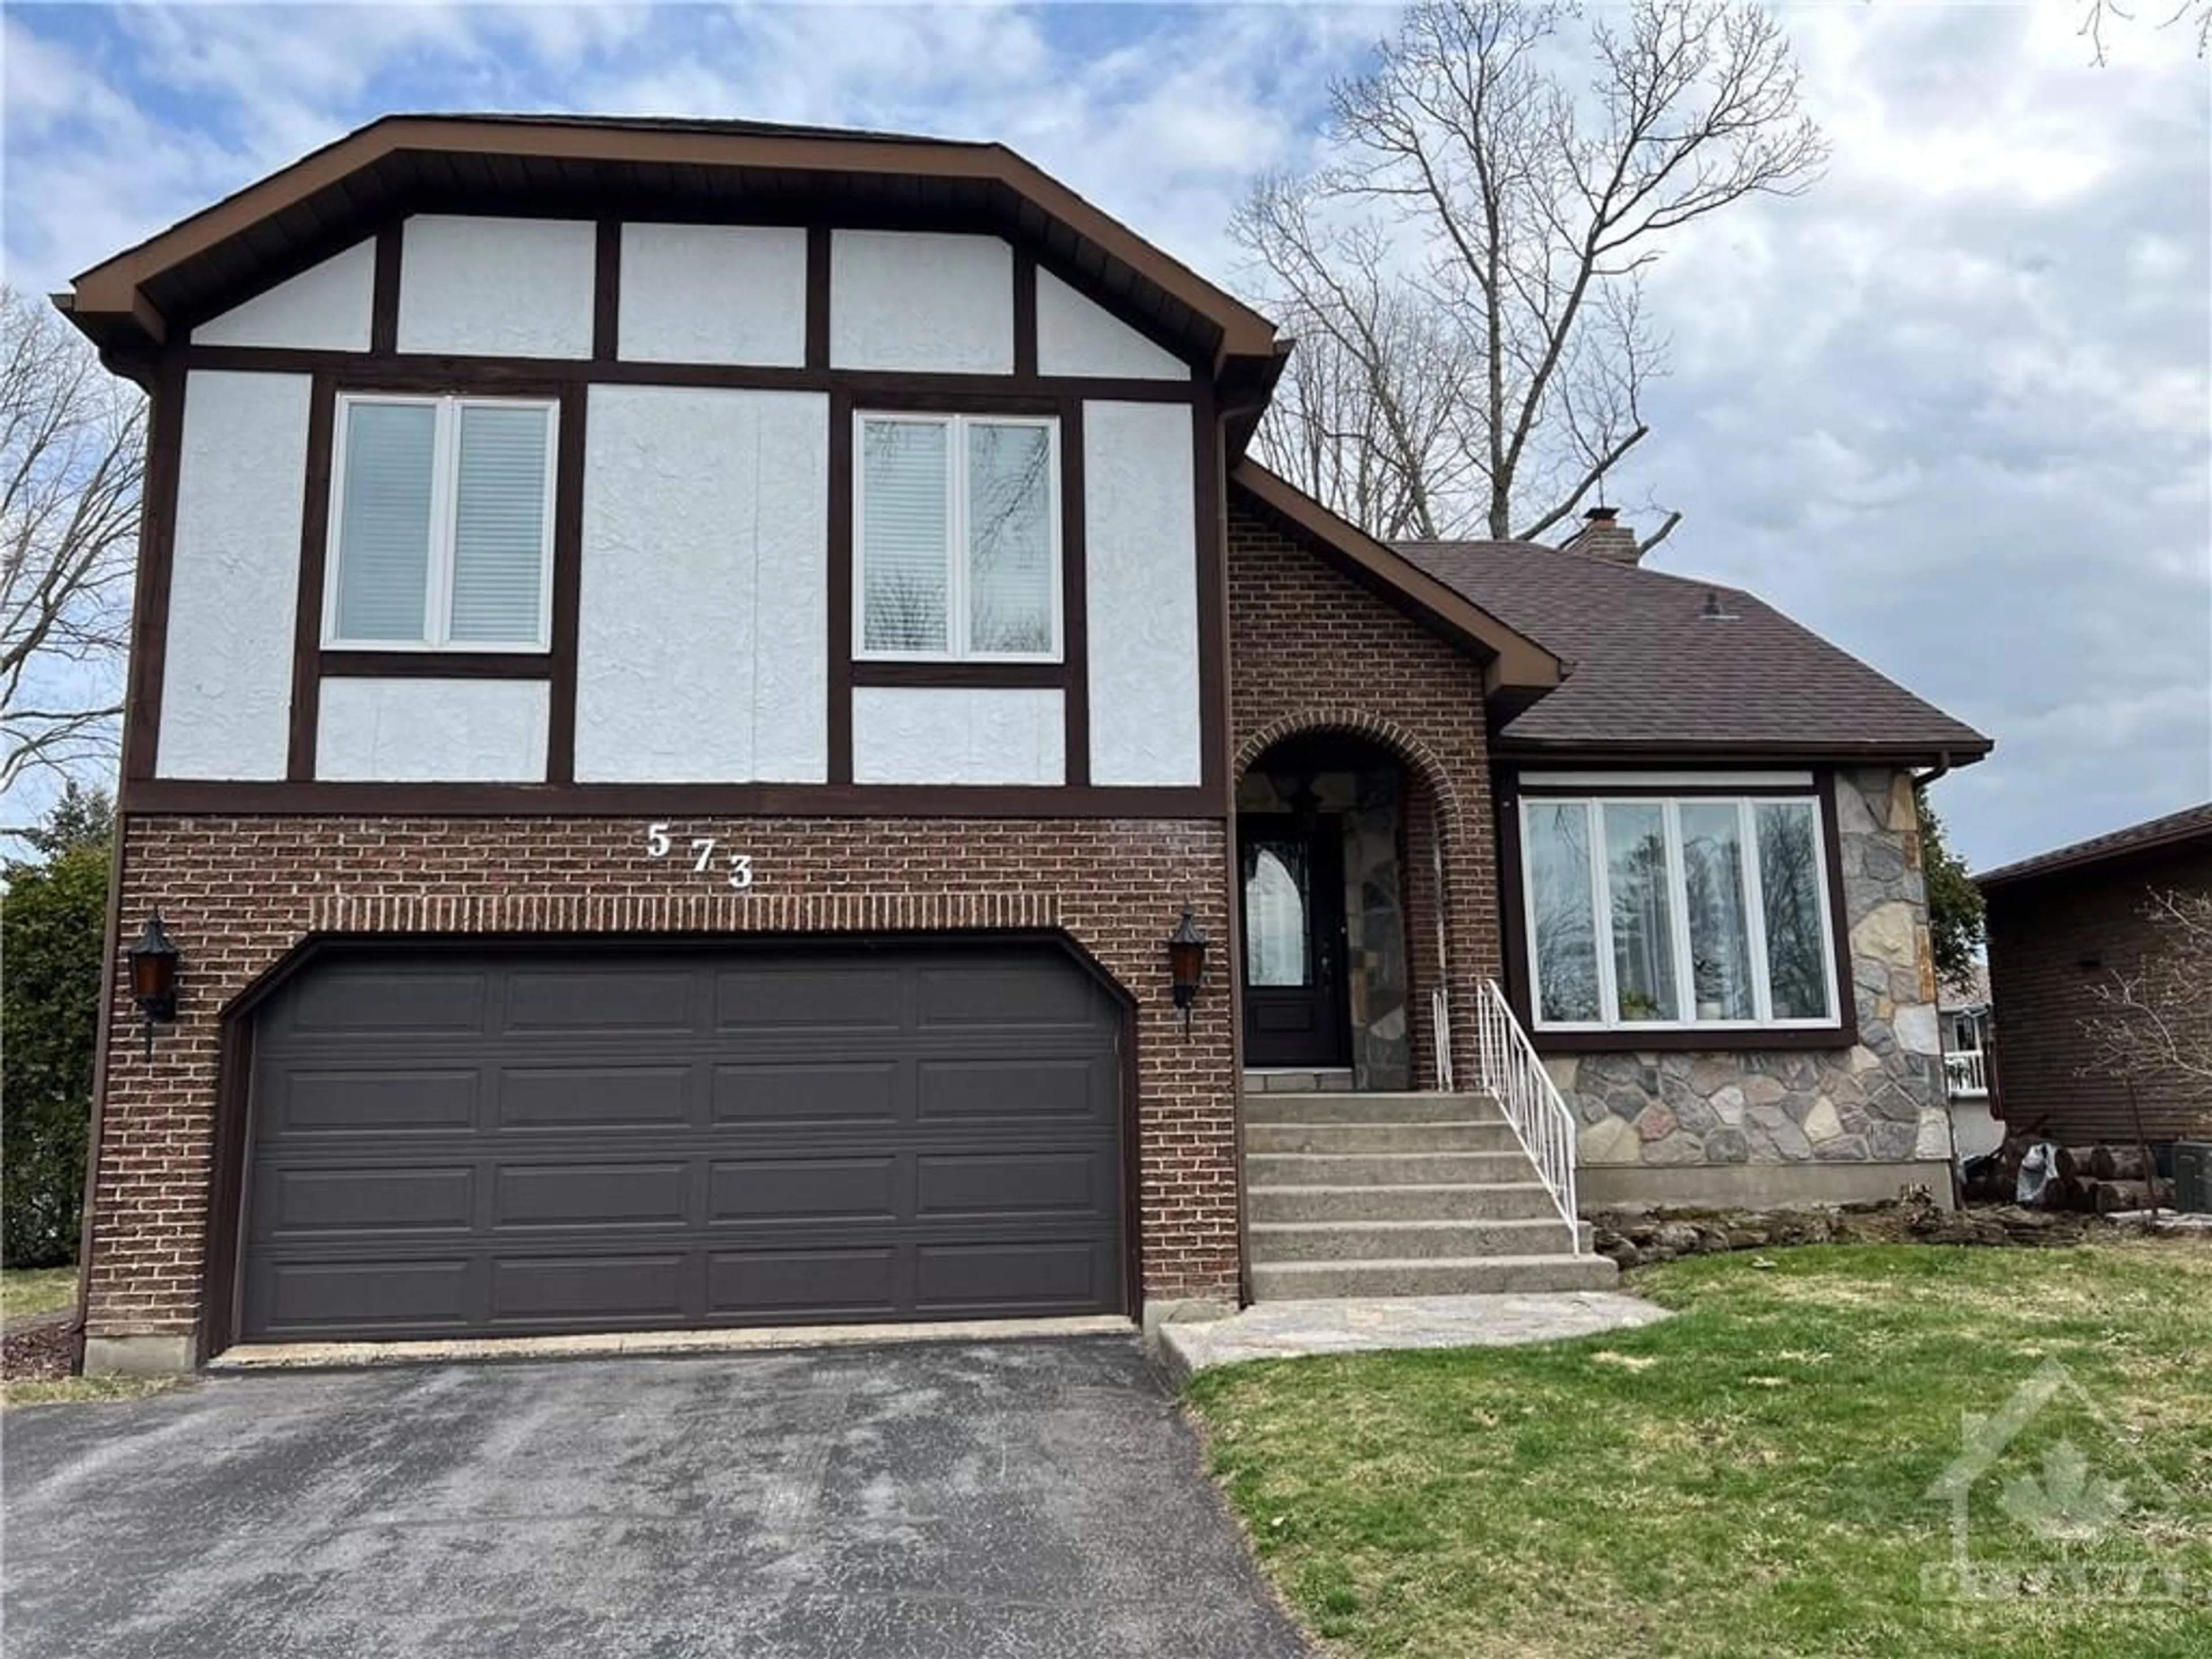 Home with brick exterior material for 573 LYNWOOD Dr, Cornwall Ontario K6H 5W7